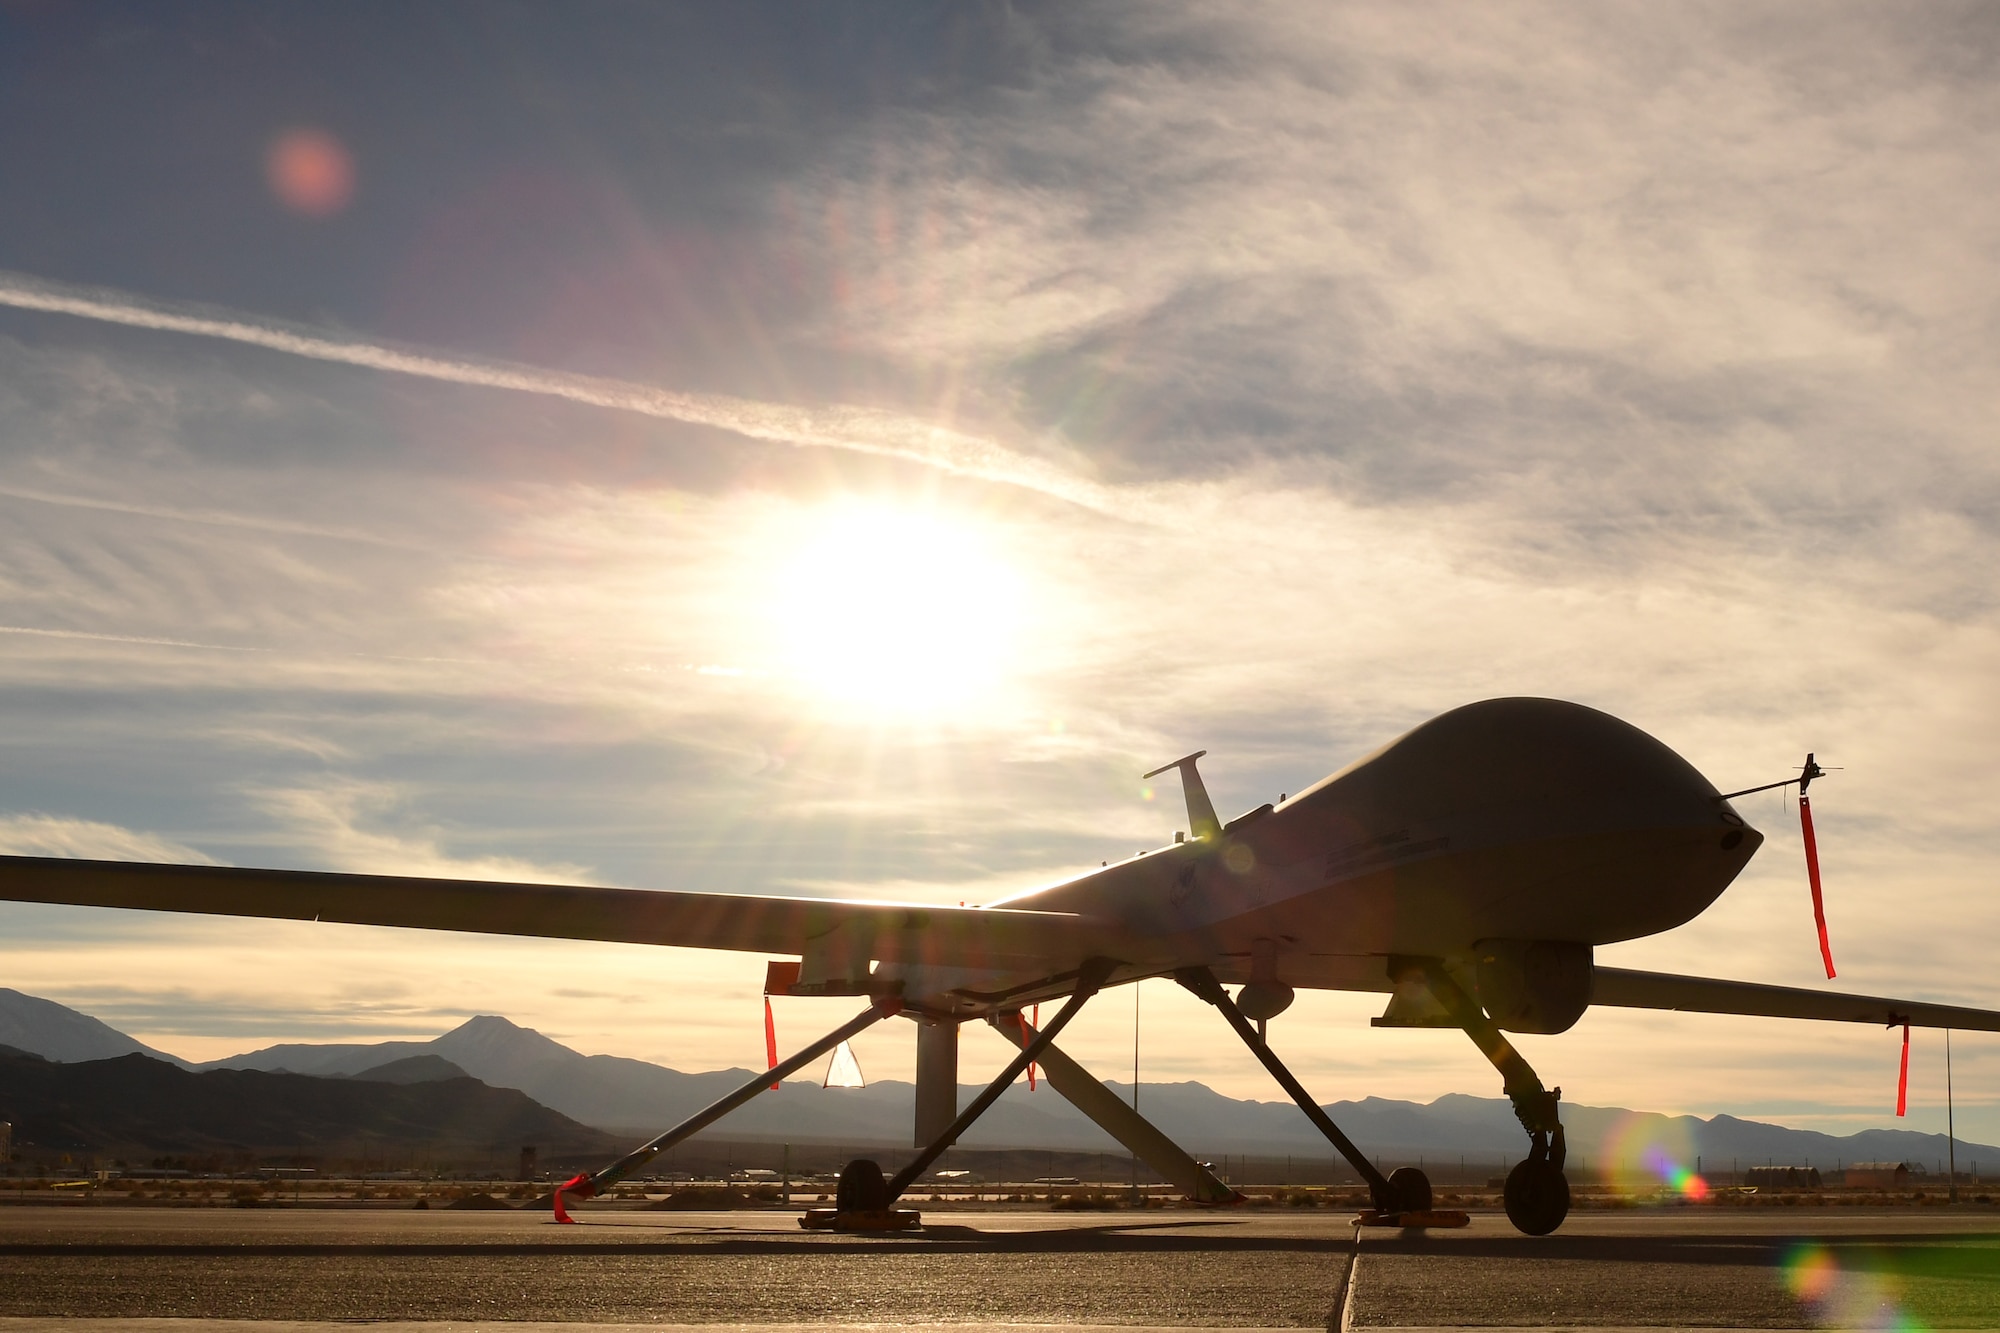 An MQ-1 Predator sits on the flight line Dec. 8, 2016, at Creech Air Force Base, Nev. The predator started as an RQ-1 in the late 1990s providing reconnaissance capabilities only until the early 2000s when it was equipped with two AGM-114 Hellfire missiles. (U.S. Air Force photo by Senior Airman Christian Clausen)